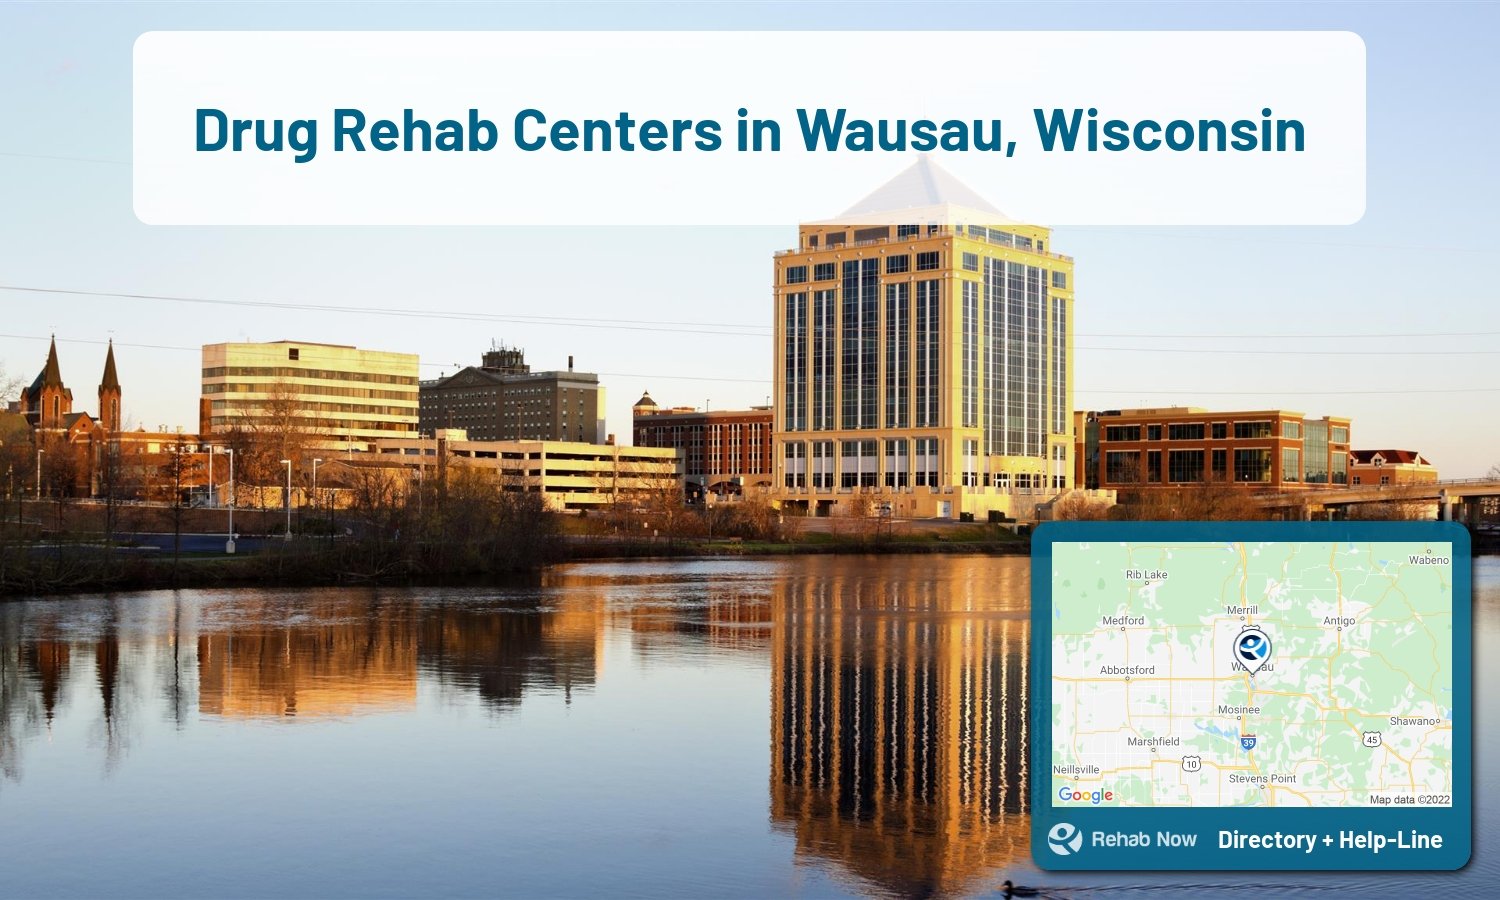 Wausau, WI Treatment Centers. Find drug rehab in Wausau, Wisconsin, or detox and treatment programs. Get the right help now!